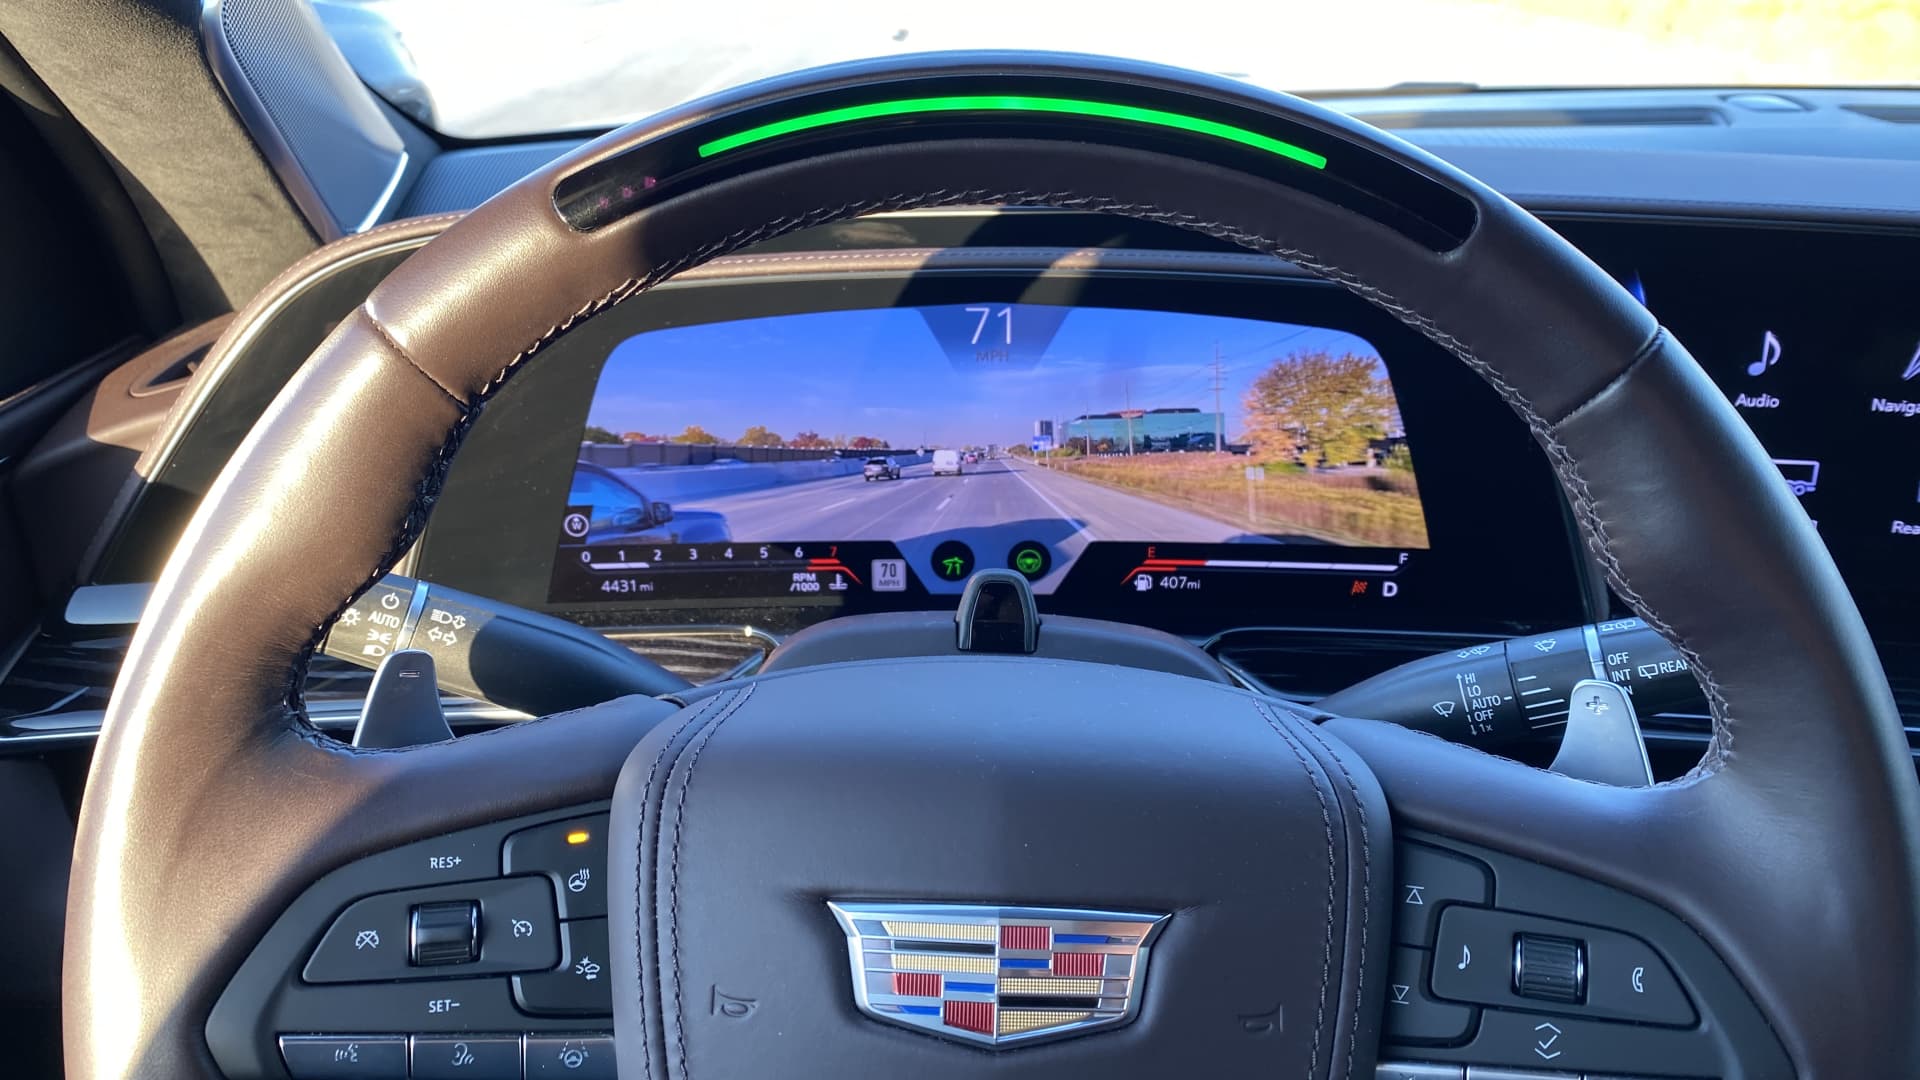 I drove hundreds of miles 'hands-free' in GM, Ford and Tesla cars – here's how it went